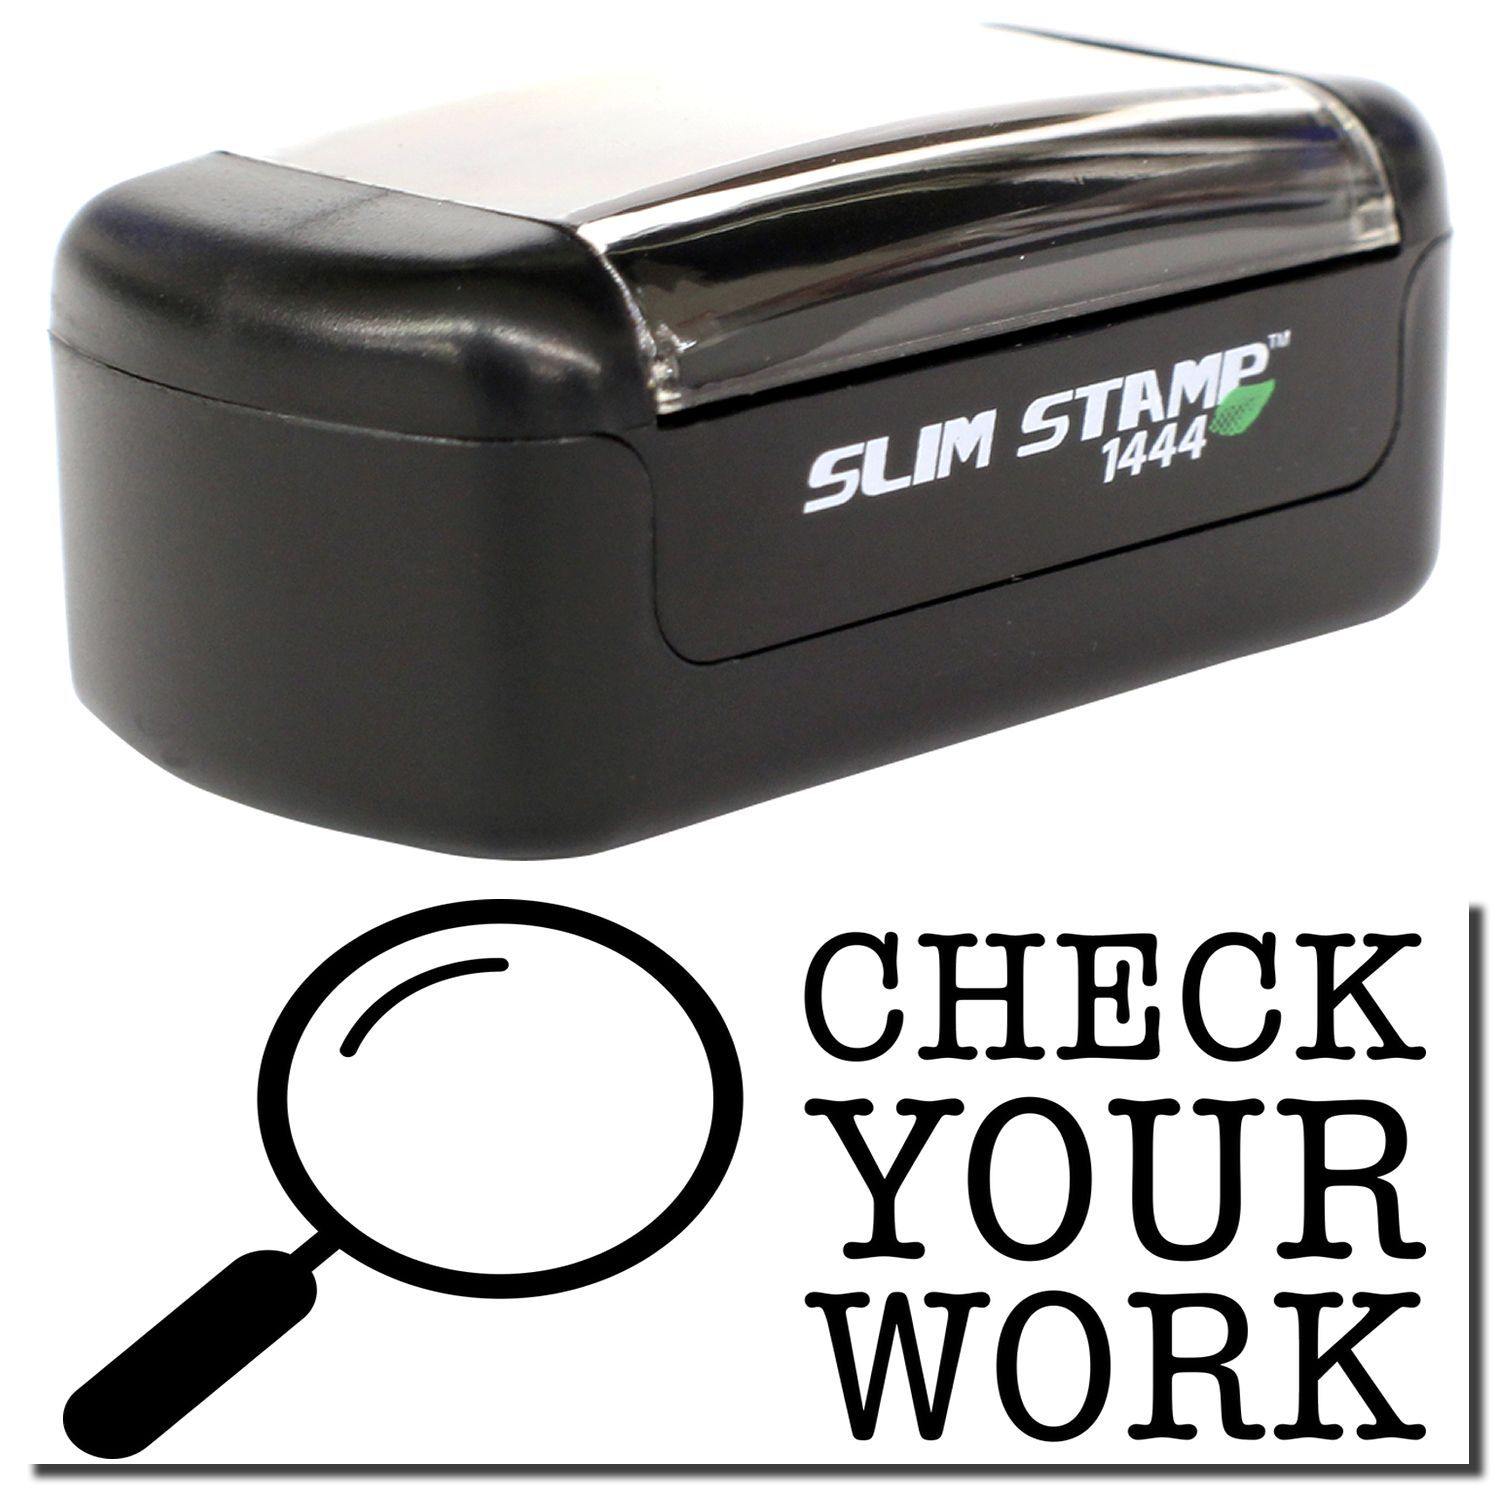 A stock office pre-inked stamp with a stamped image showing how the text "CHECK YOUR WORK" with a magnifying glass image on the left side is displayed after stamping.